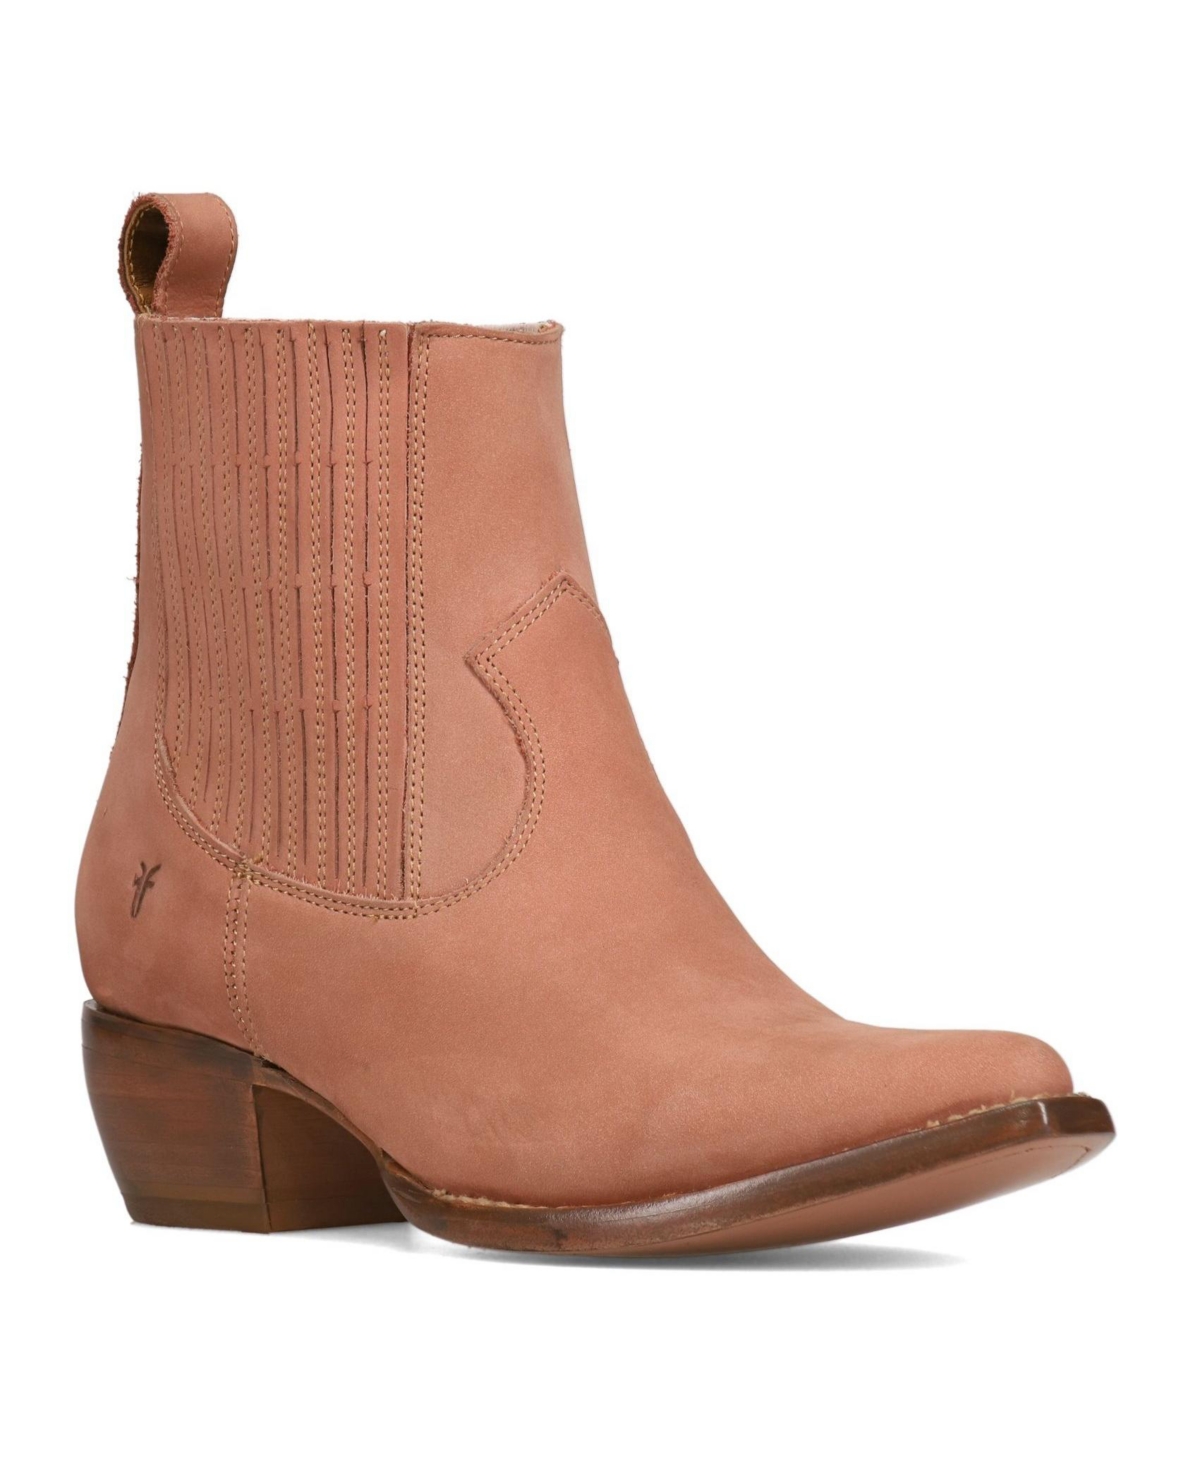 Women's Sacha Western Leather Chelsea Booties - Rose Cake